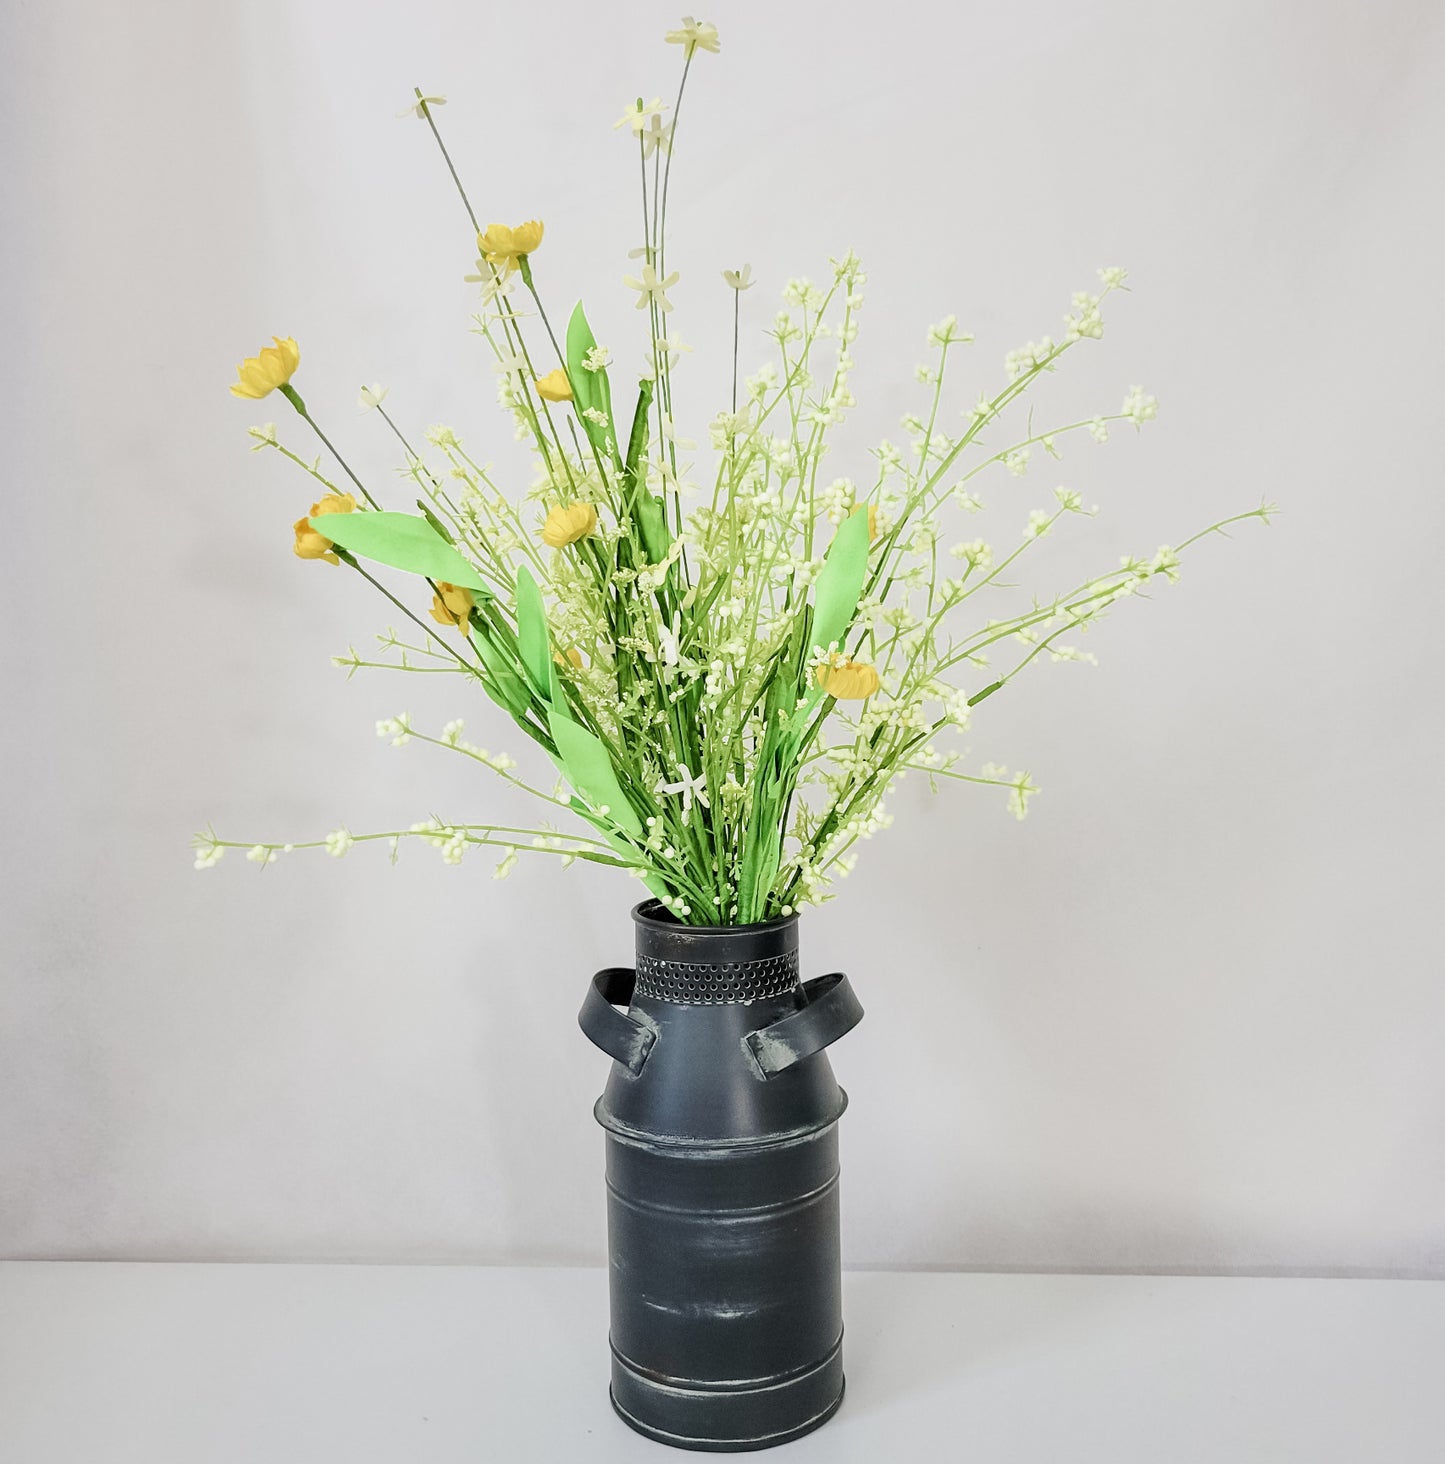 Sunny Day Stems (set of 2)